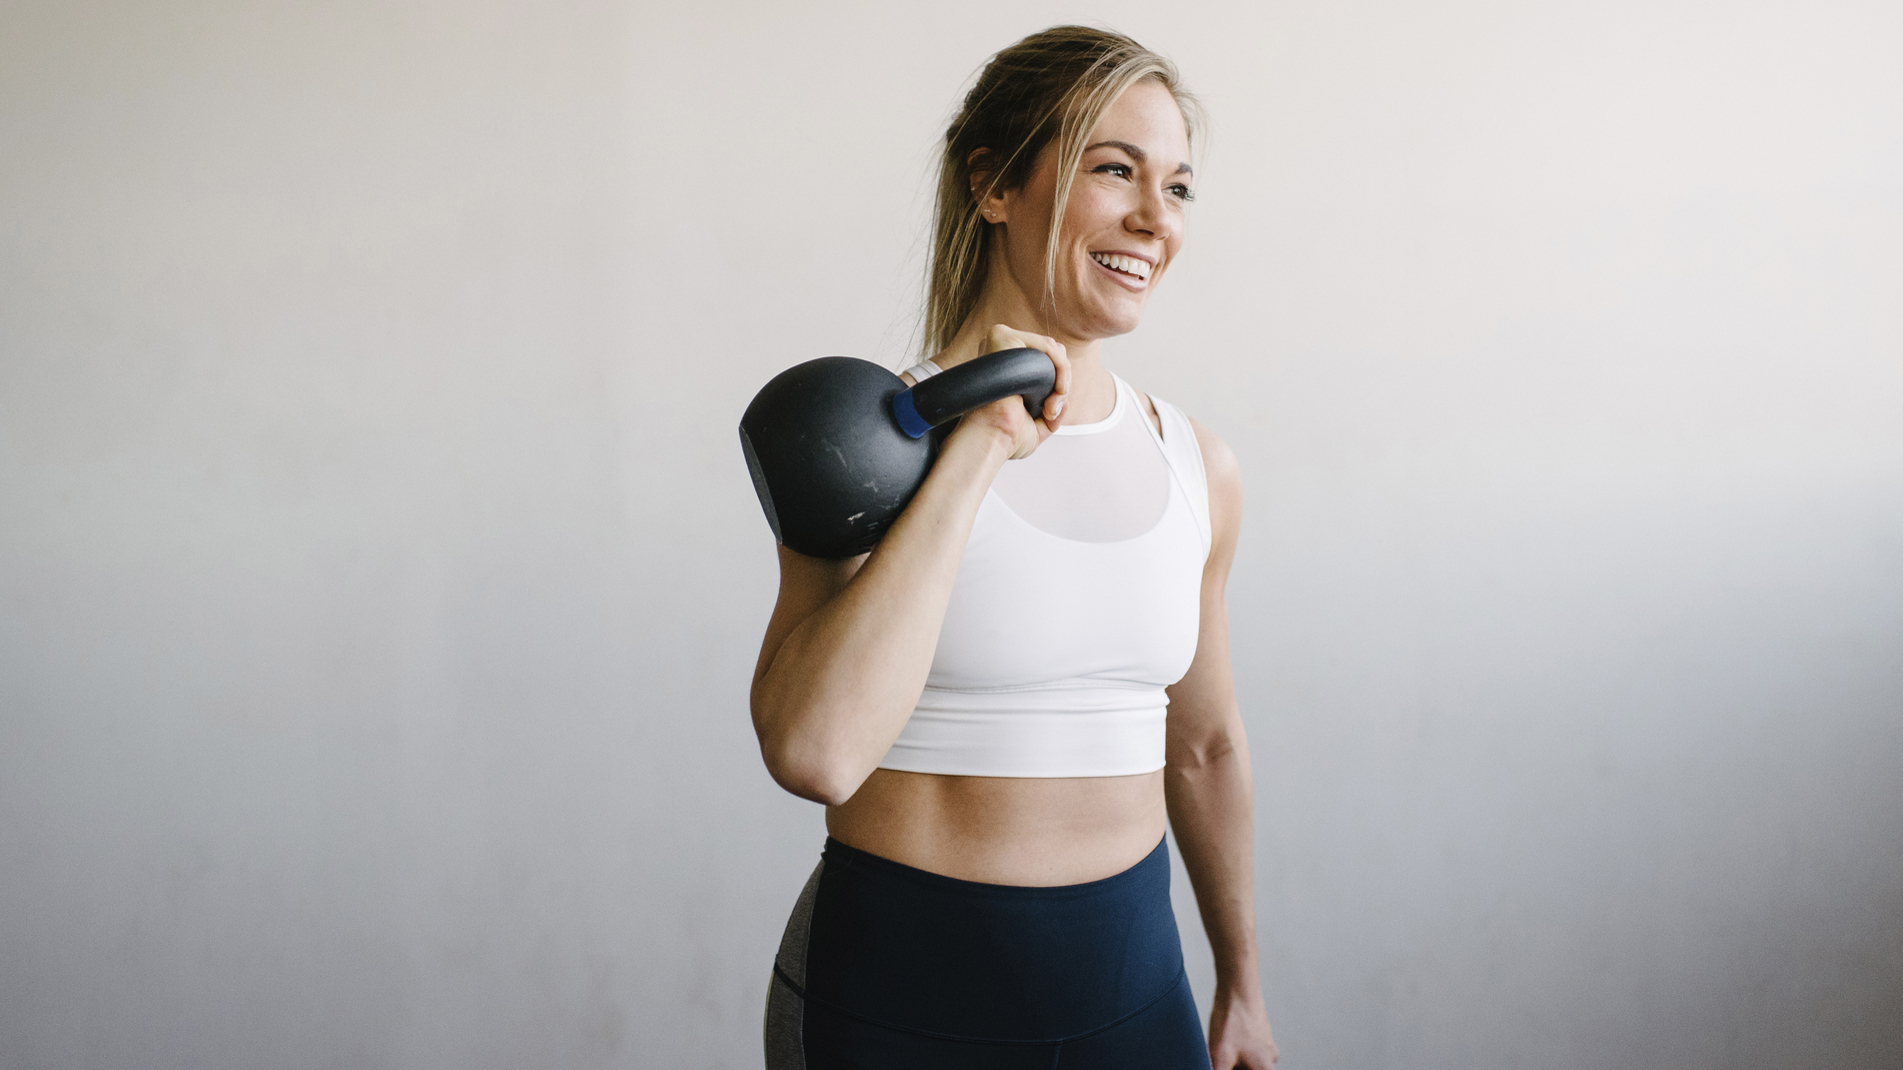 size kettlebell should I get? | Fit&Well